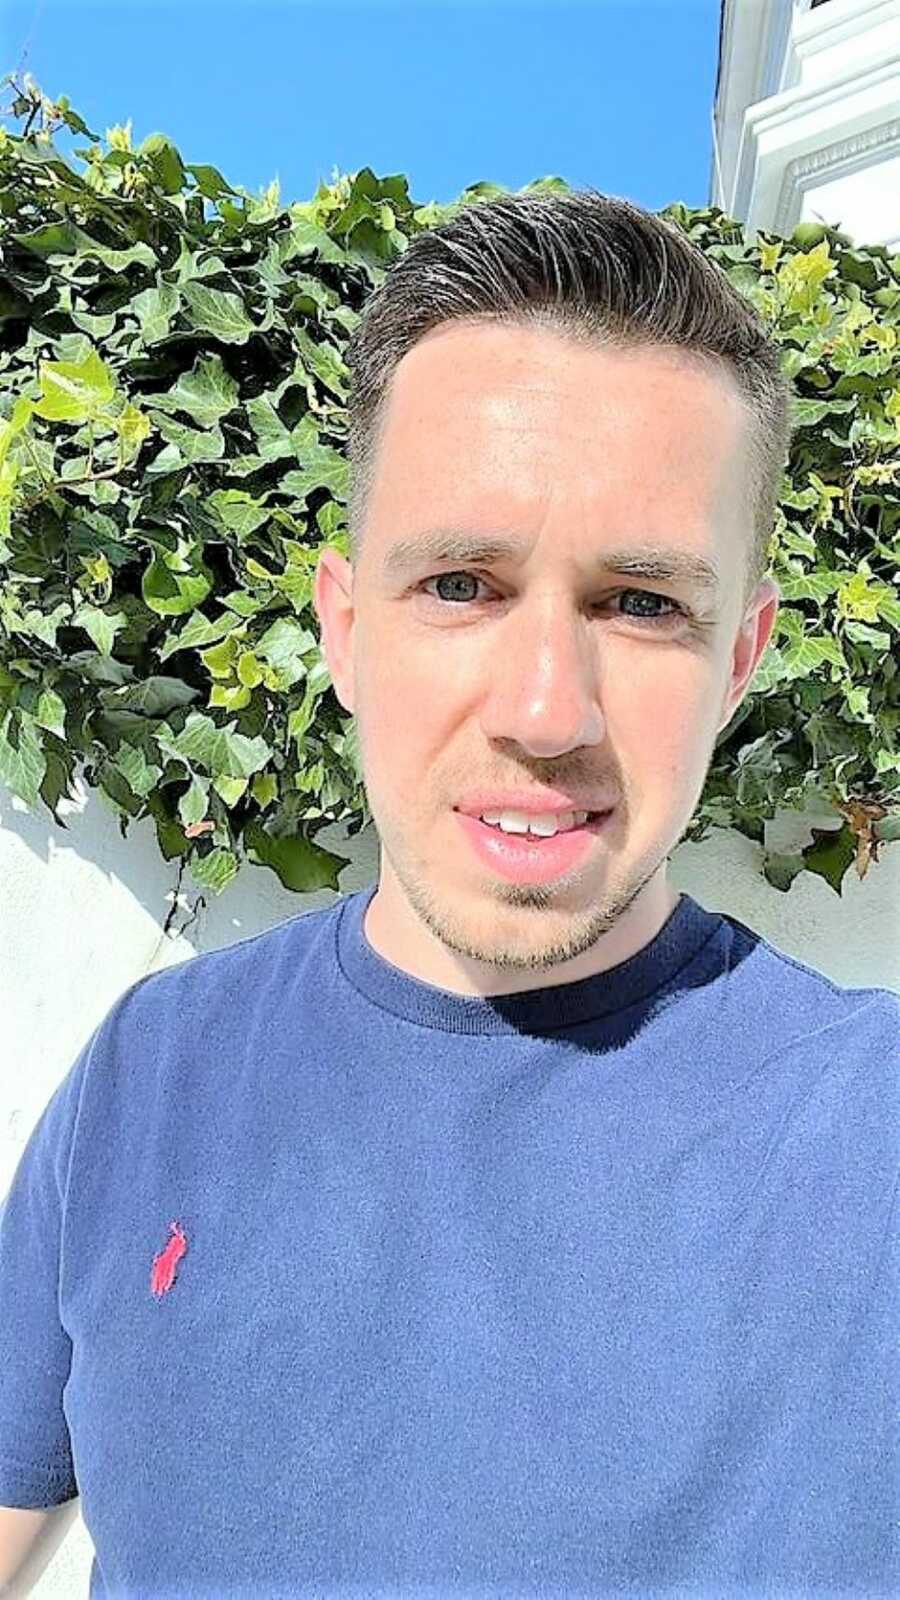 selfie of man wearing a navy t-shirt with the sunlight reflected on his face